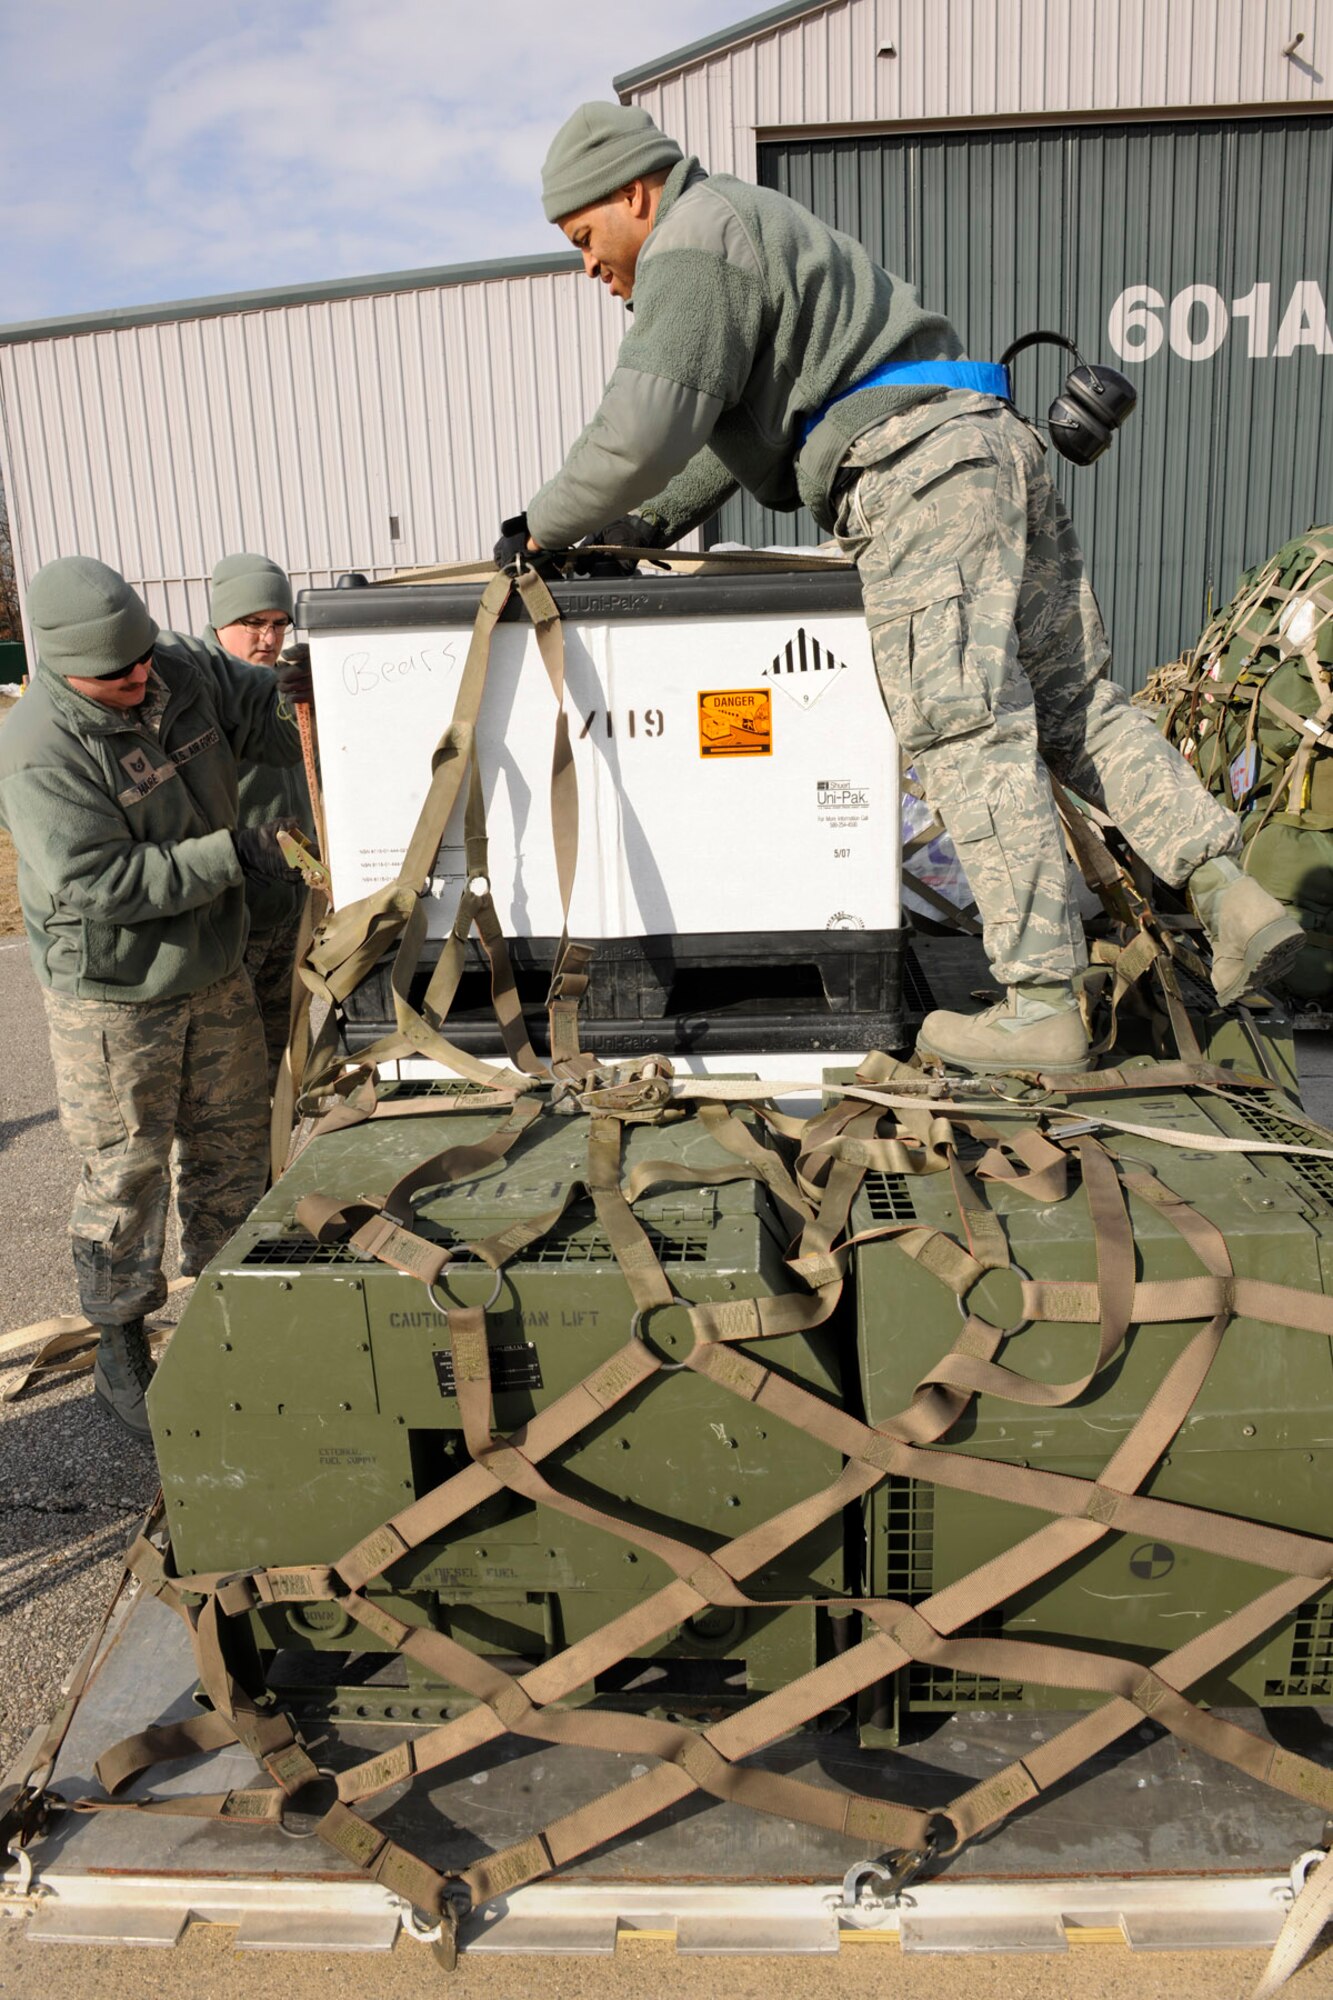 150319-Z-EZ686-074 – Airmen from the 127th Logistics Readiness Squadron load a pallet of cargo prior to loading it onto an aircraft at the Alpena Combat Readiness Training Center, Mich., March 19, 2015. The 127th LRS, home-stationed at Selfridge Air National Guard Base, provides aerial port services to military units across the state of Michigan.  (U.S. Air National Guard photo by Master Sgt. David Kujawa) 